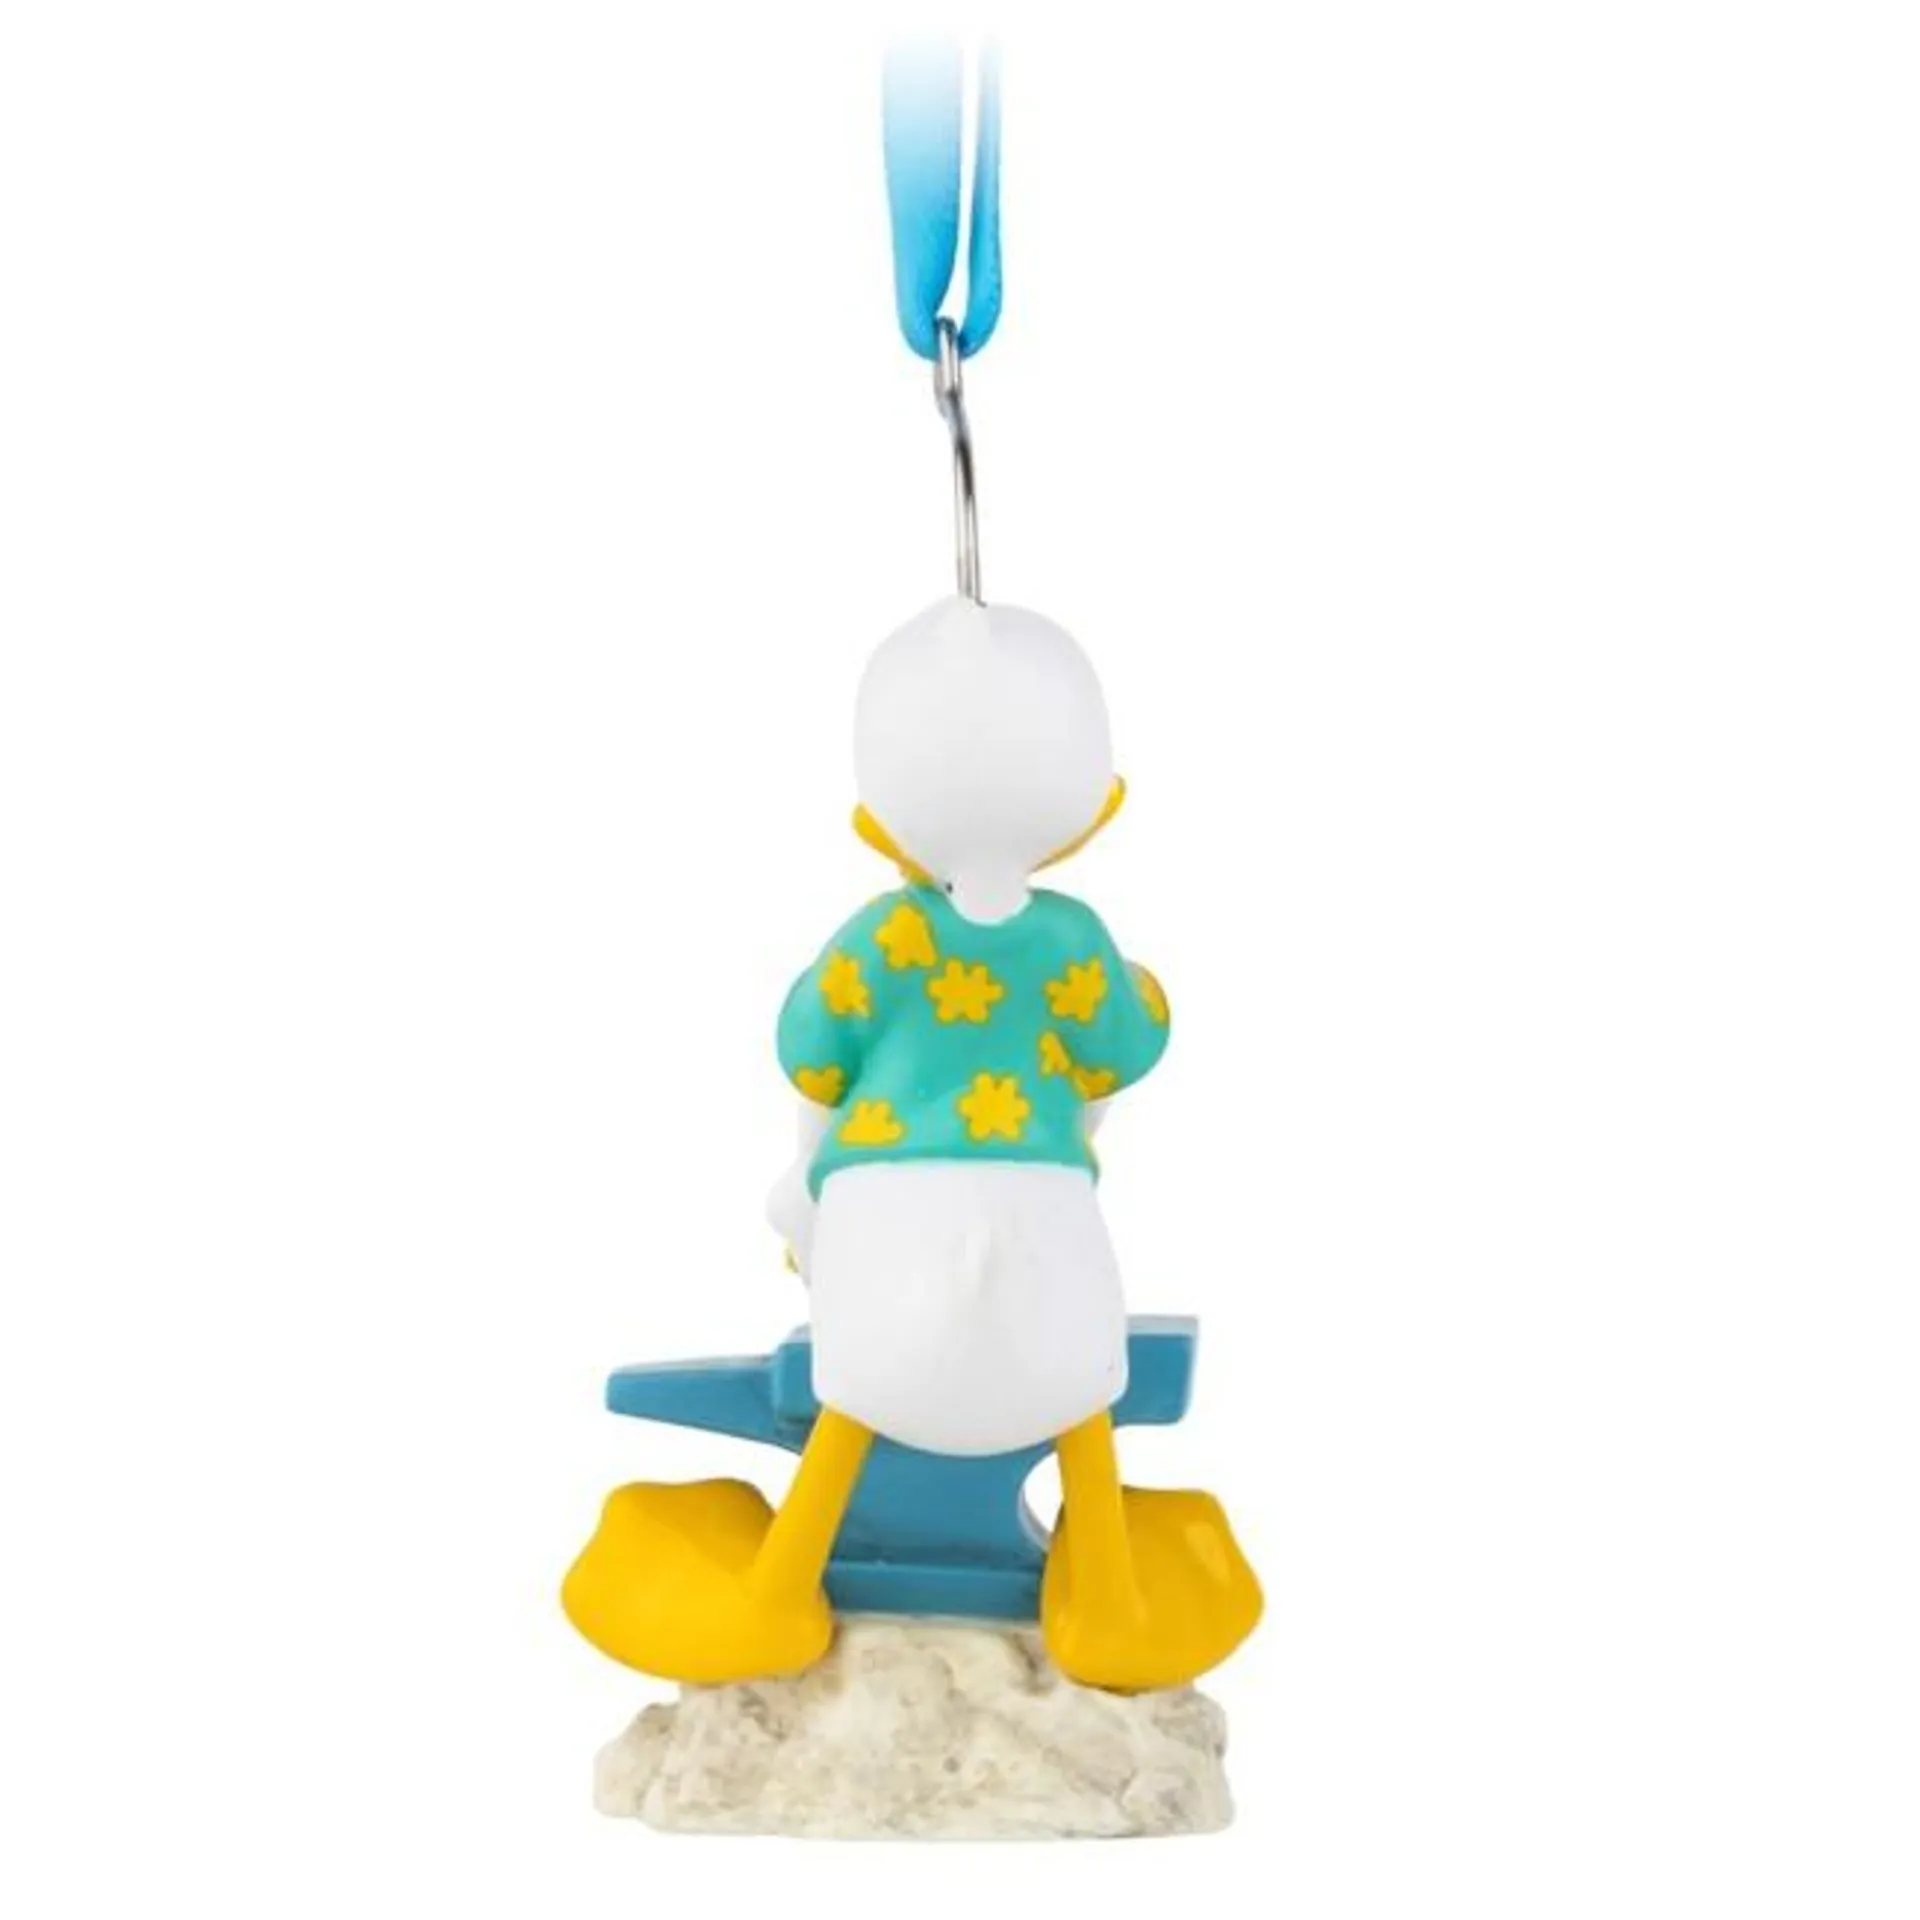 Donald Duck Sword in the Stone "Play in the Park" Ornament